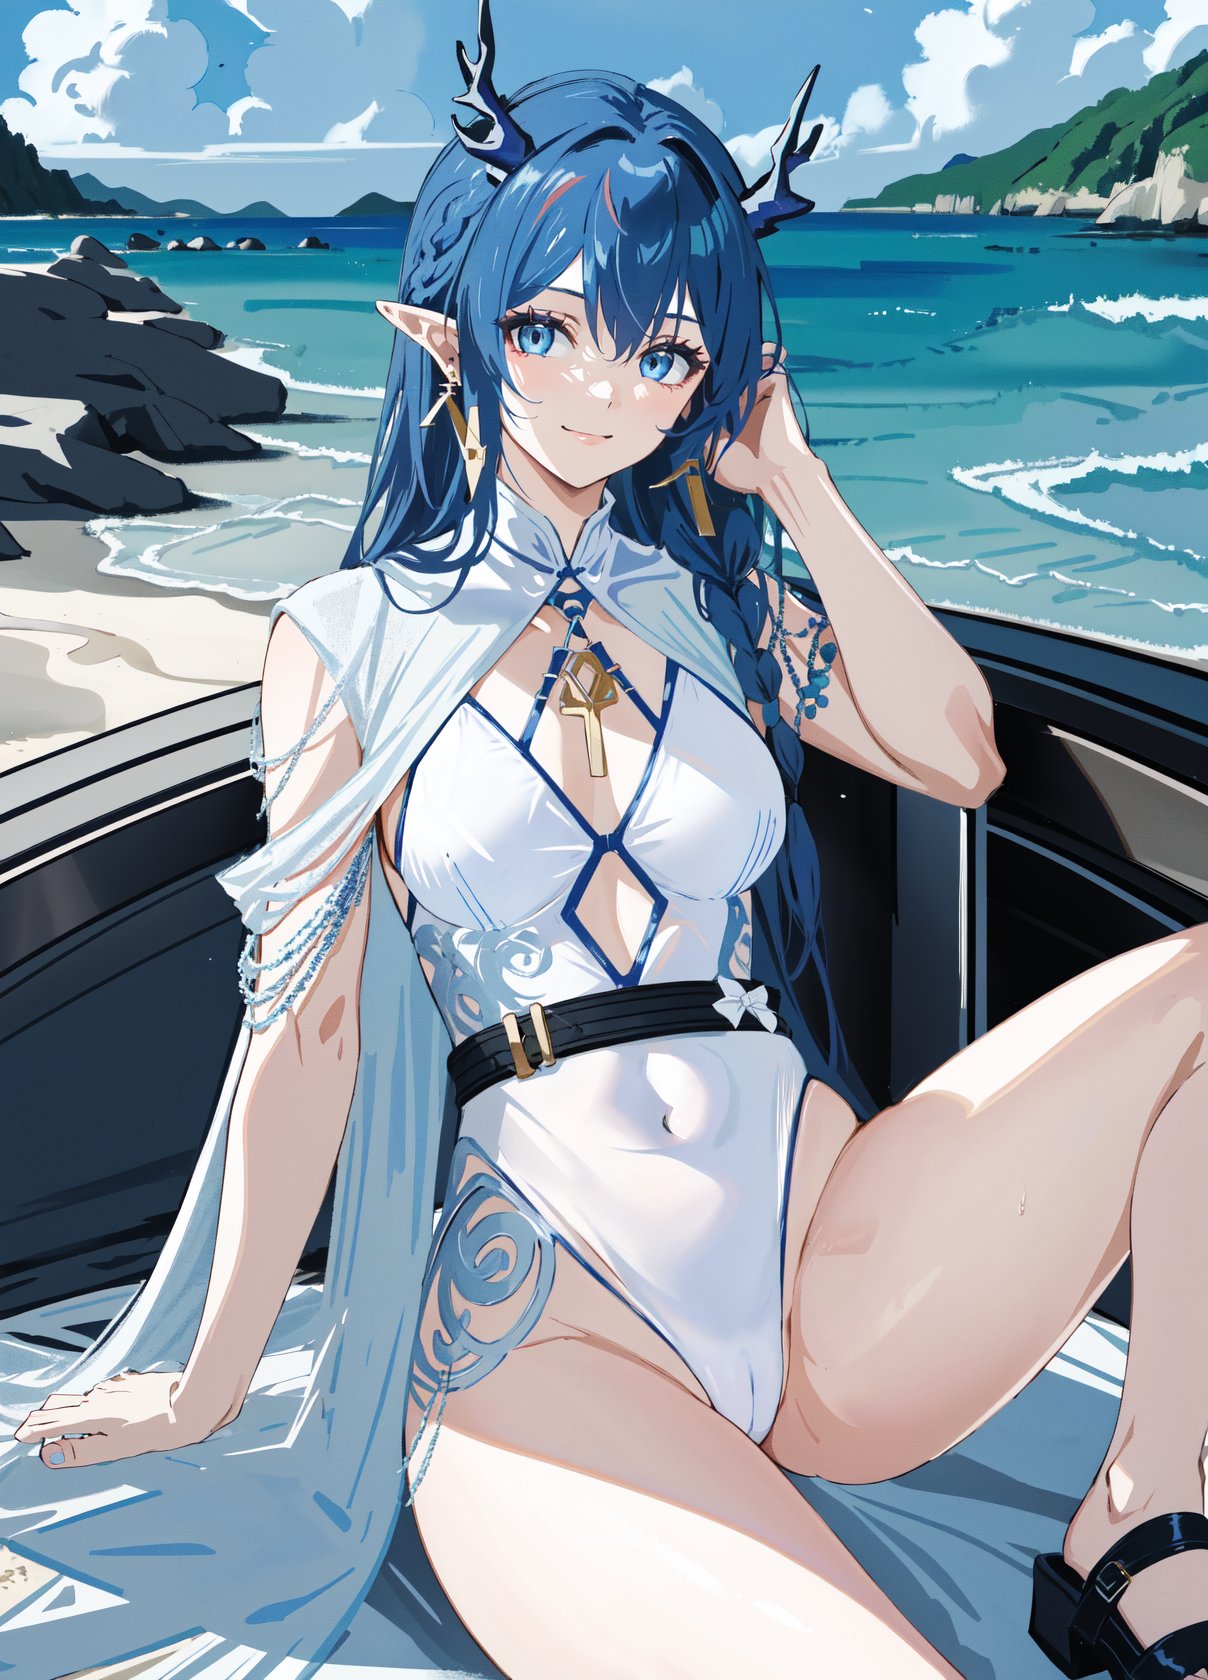 1girl,[slim body],[Full body, full body image],masterpiece, best quality,bangs, blue_eyes,braid, breasts,earrings,horns,jewelry,long_hair,looking_at_viewer,pointy_ears,solo,asymmetrical_bangs,shou elder cutout,shallow smile,bare arms,grace,Argyle pattern cutout one-piece swimsuit,White Woven Shawl,strappy sandals,ring on swimsuit,White beach dress for women,
White Woven Shawl, beach, Braid wrapped around white ribbon,sexy pose,sitting on the seats,breasts,color full background, detaied background,white belt,arm tattoo,chain necklace, open jacket,clothes tailoring
Gradient Clothes,magazine cover,(blue-and-white porcelain Clothes)
